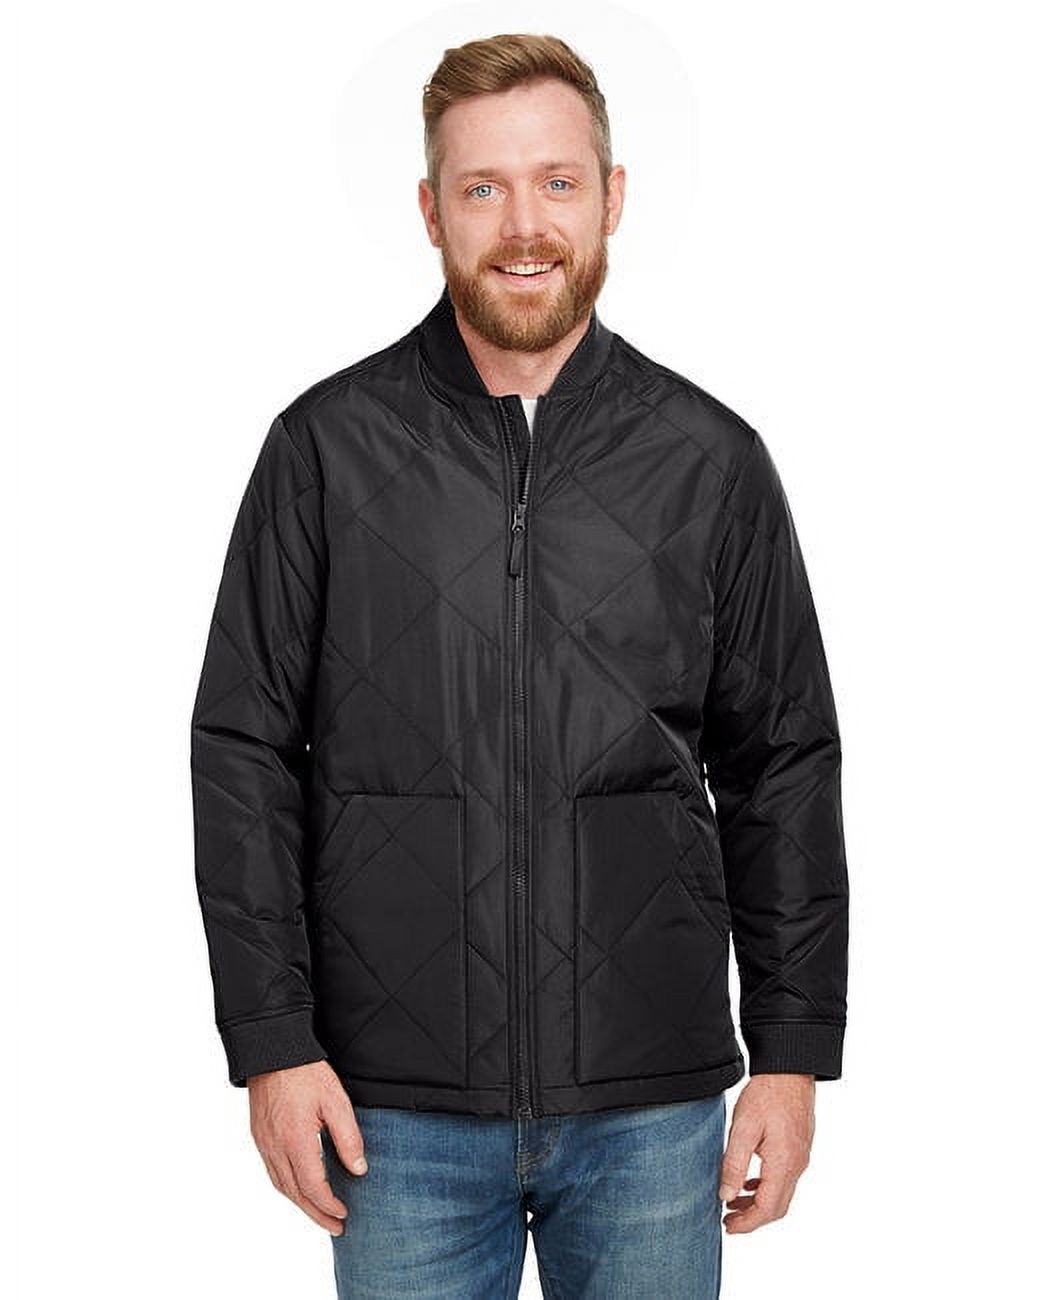 Adult Dockside Insulated Utility Jacket - DARK CHARCOAL - 5XL - image 1 of 3